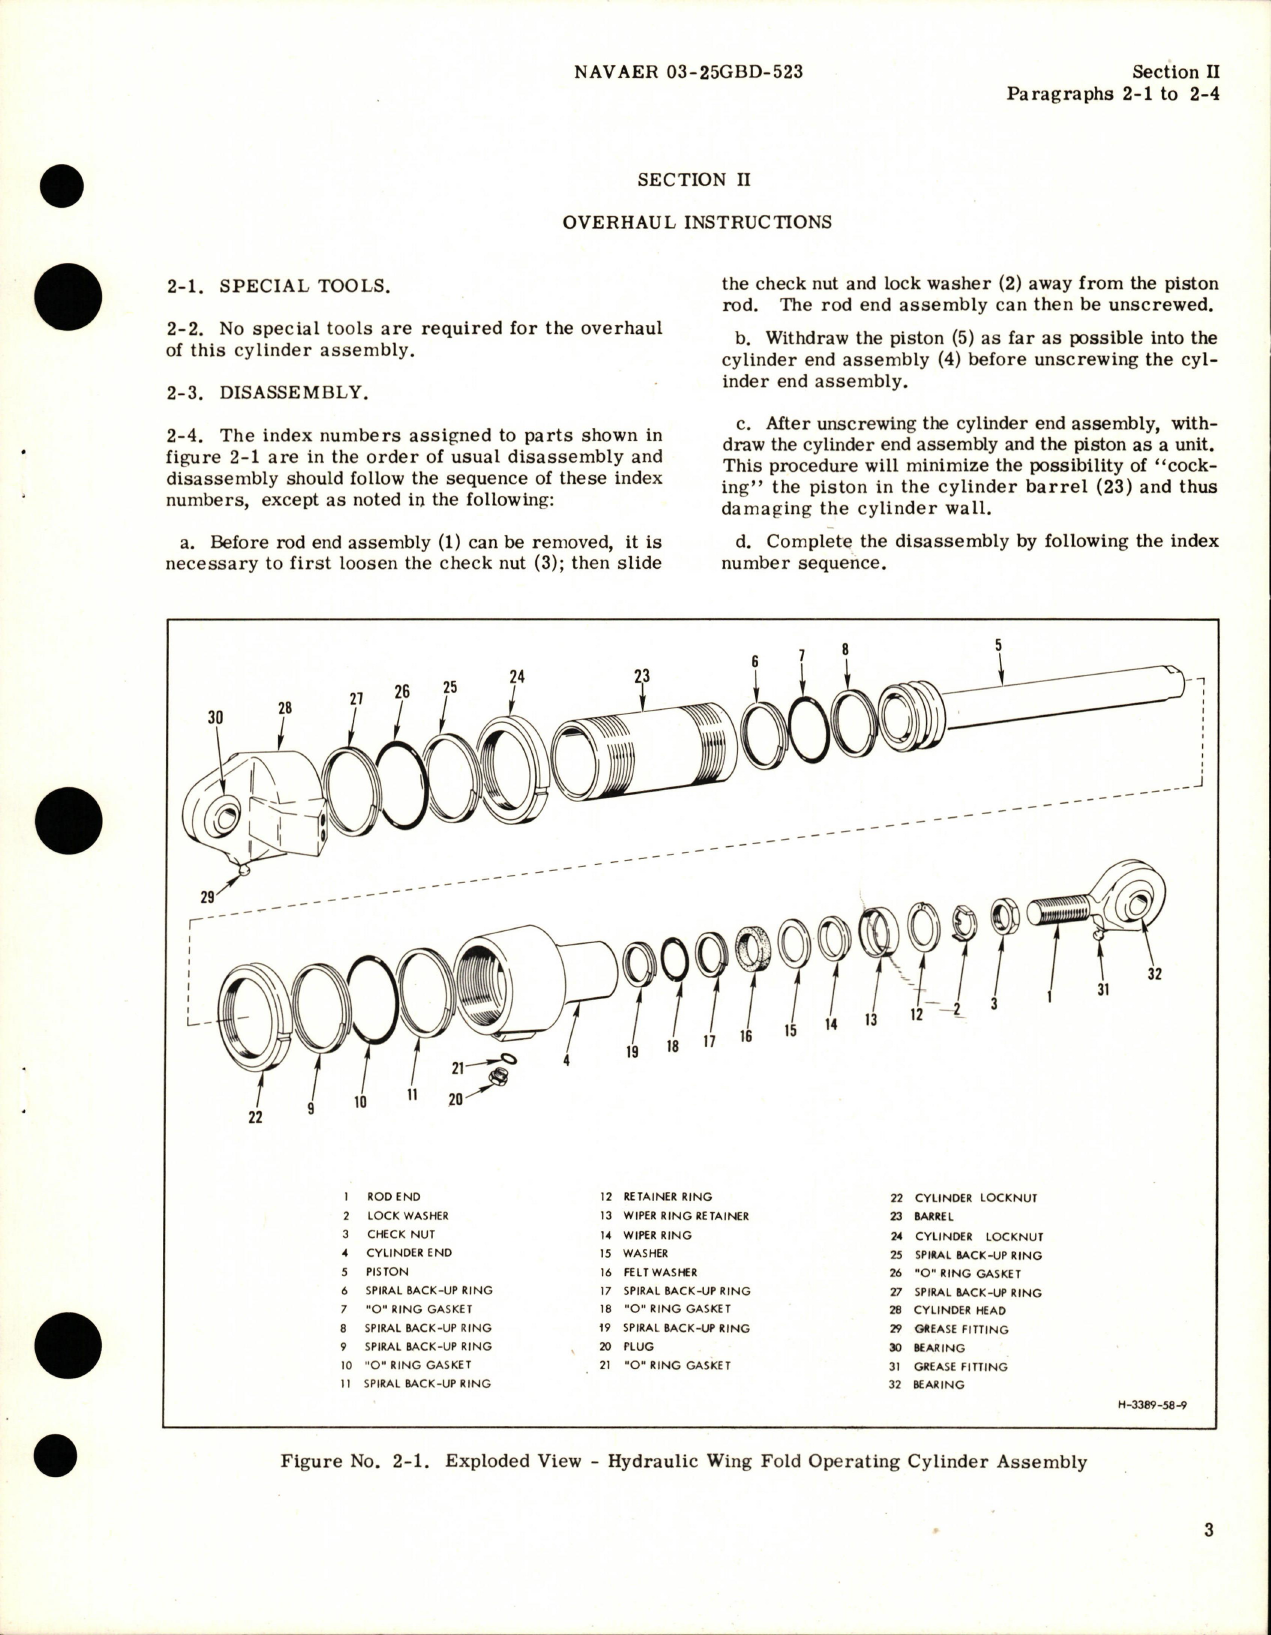 Sample page 5 from AirCorps Library document: Overhaul Instructions for Hydraulic Wing Fold Operating Cylinder Assembly - Parts 181-58031-1 and 181-58031-2 